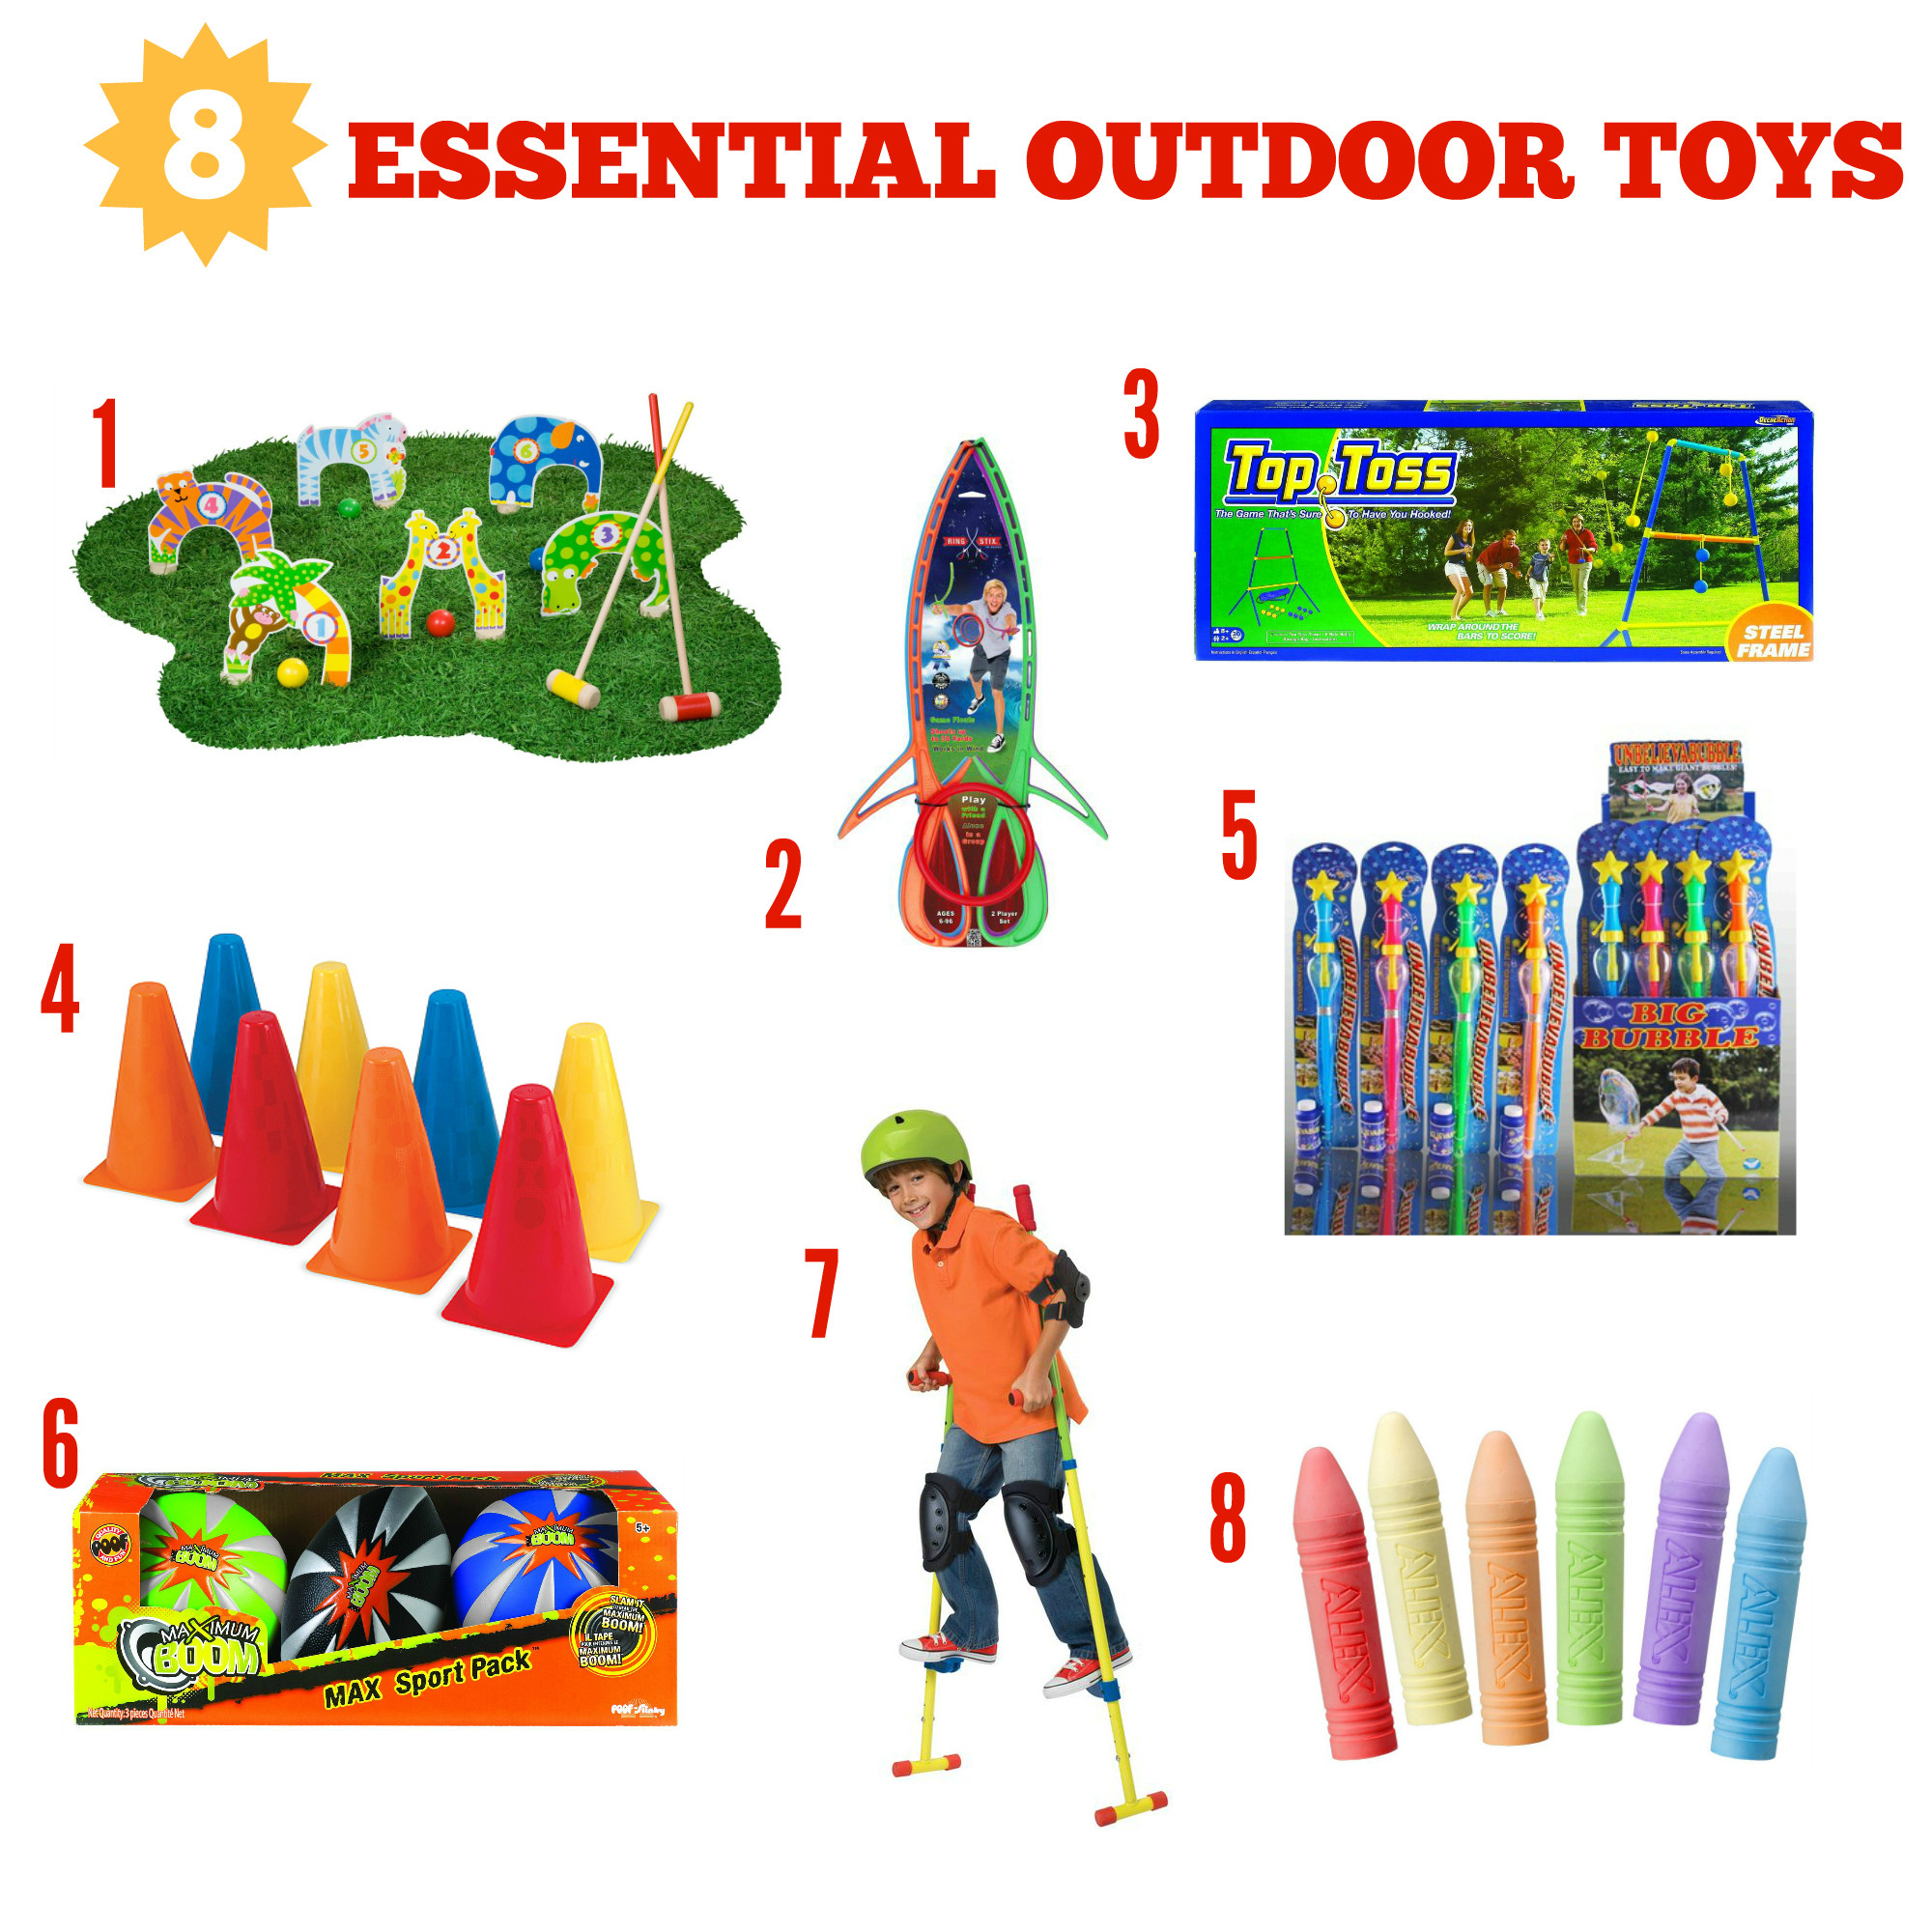 Unique Outdoor Toys For Kids
 8 Essential Outdoor Toys The Toy Insider